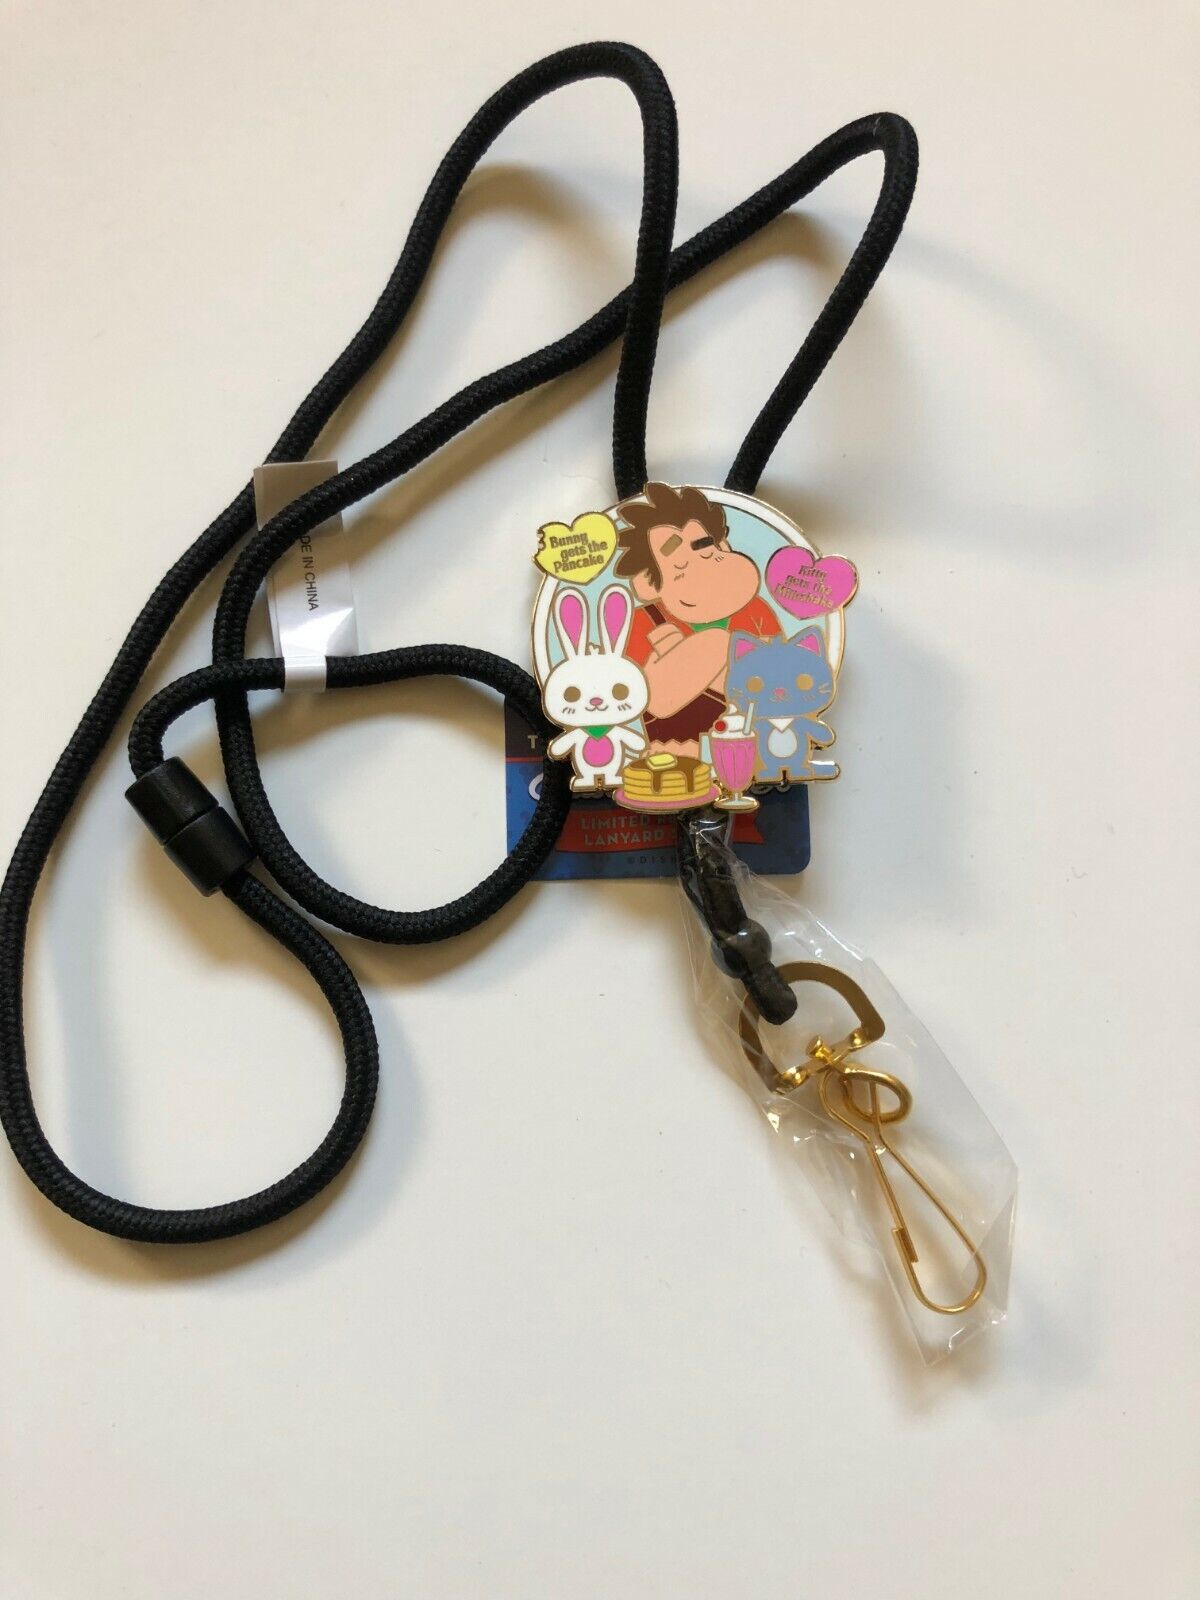 Disney DLR Cast Exclusive Bolo Lanyard Wreck it Ralph ID Tag Holder